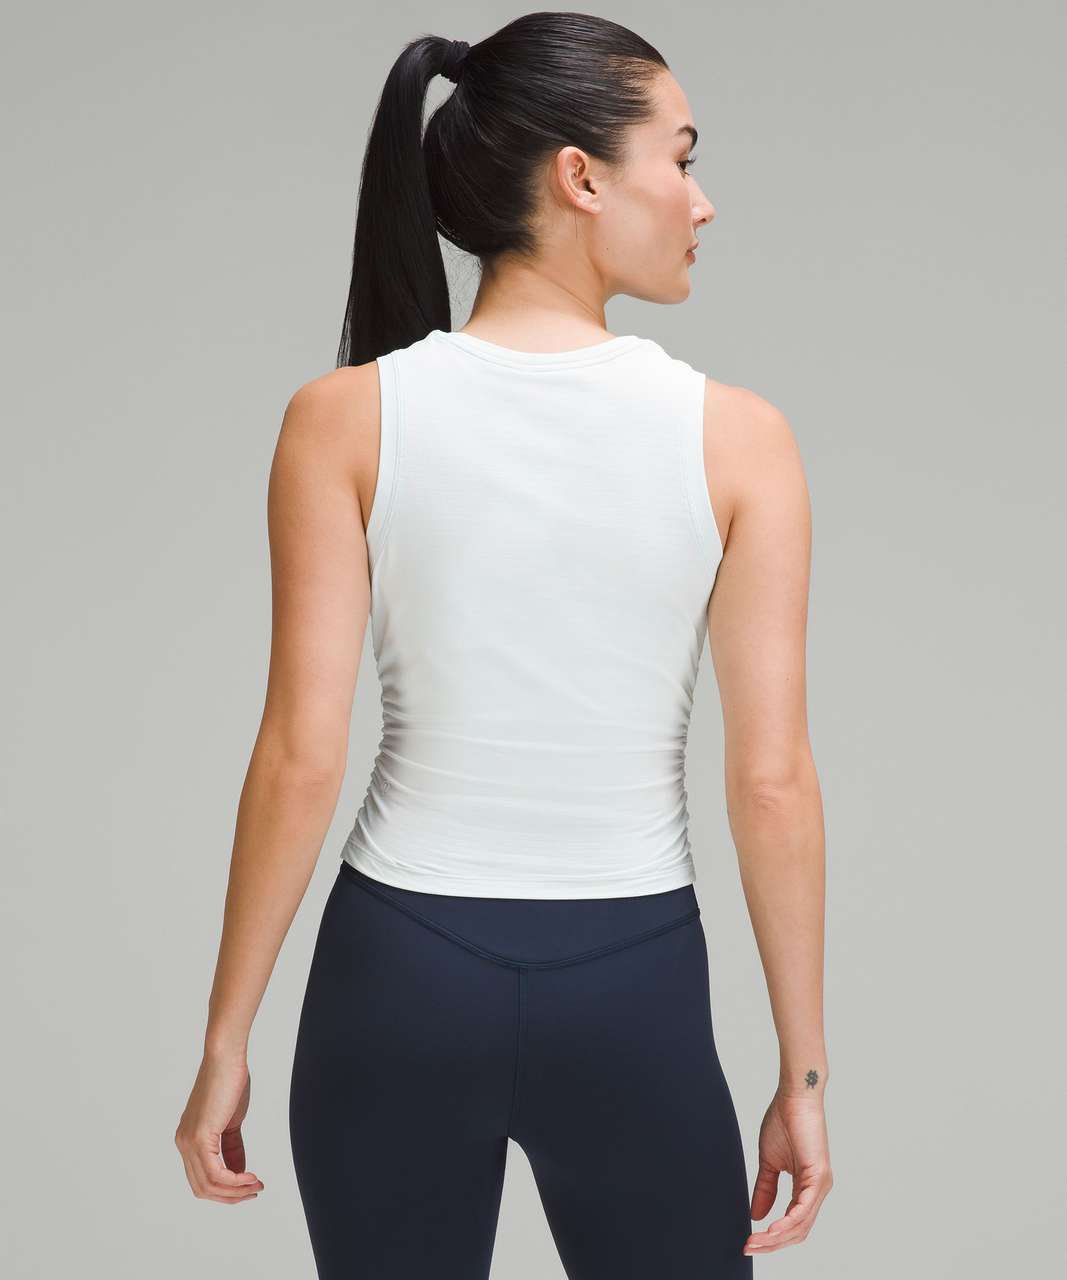 Lululemon License to Train Tight-Fit Tank Top - Heathered Sheer Blue